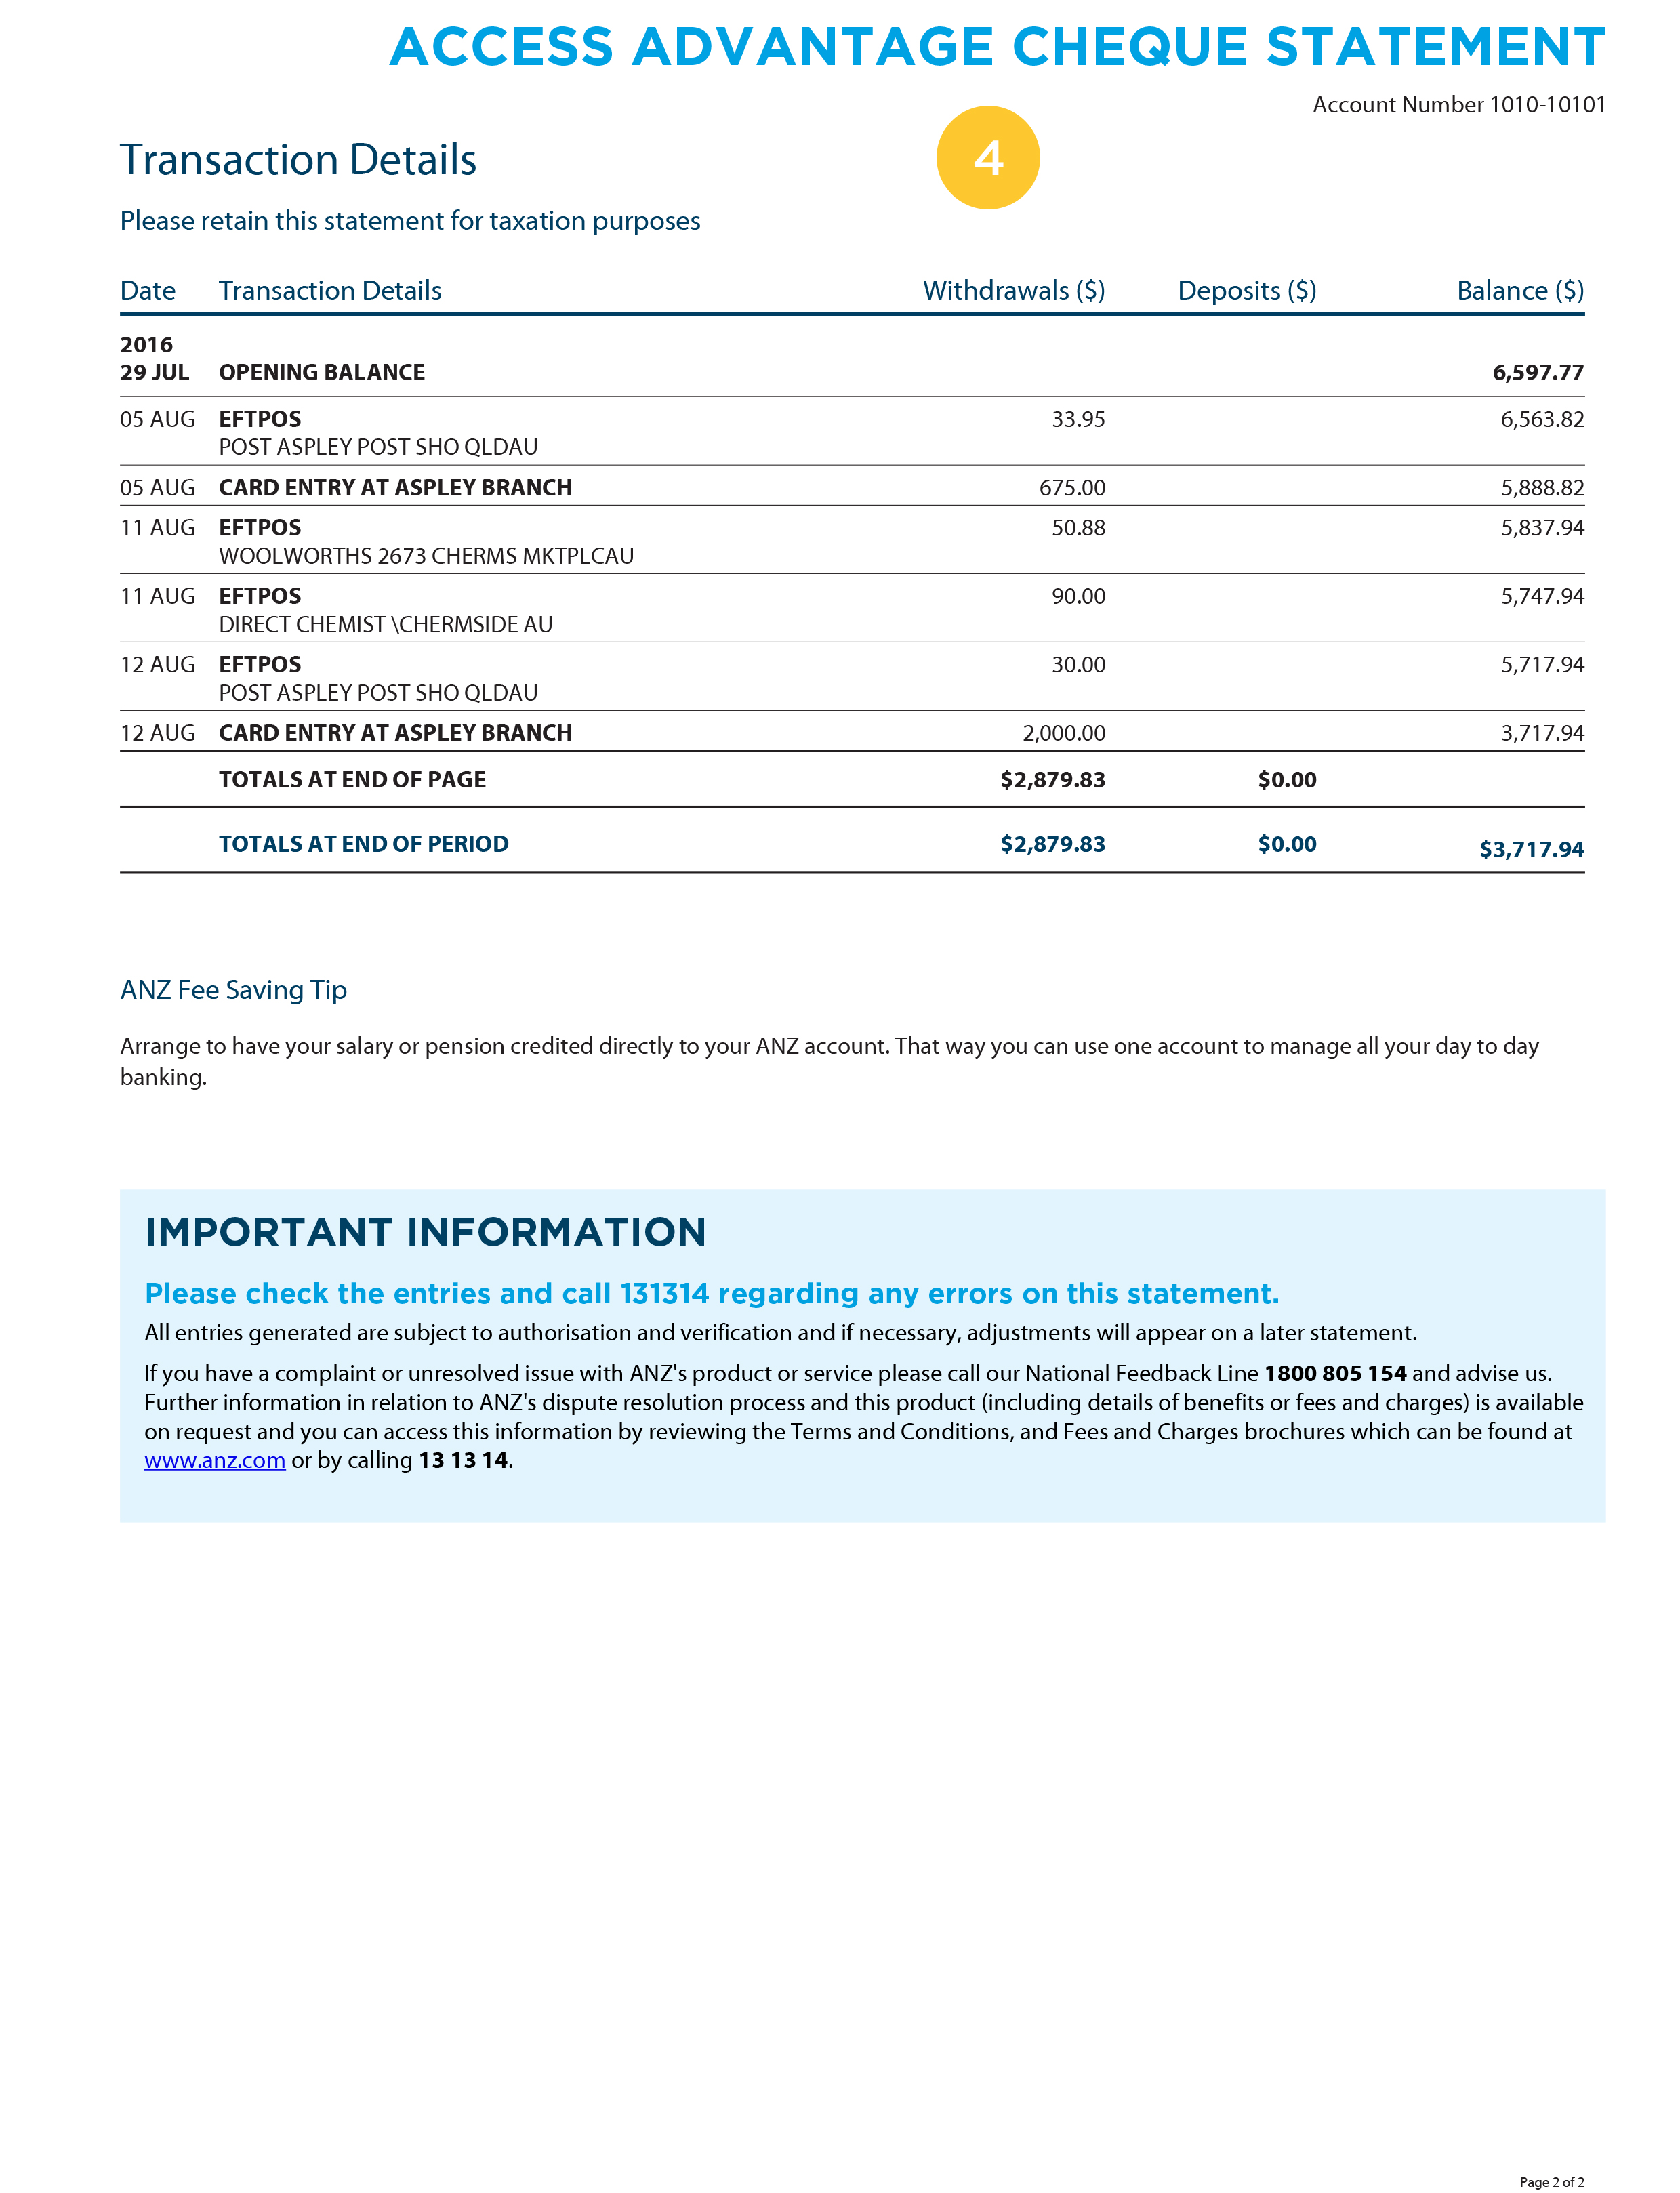 anz personal statement of financial position form